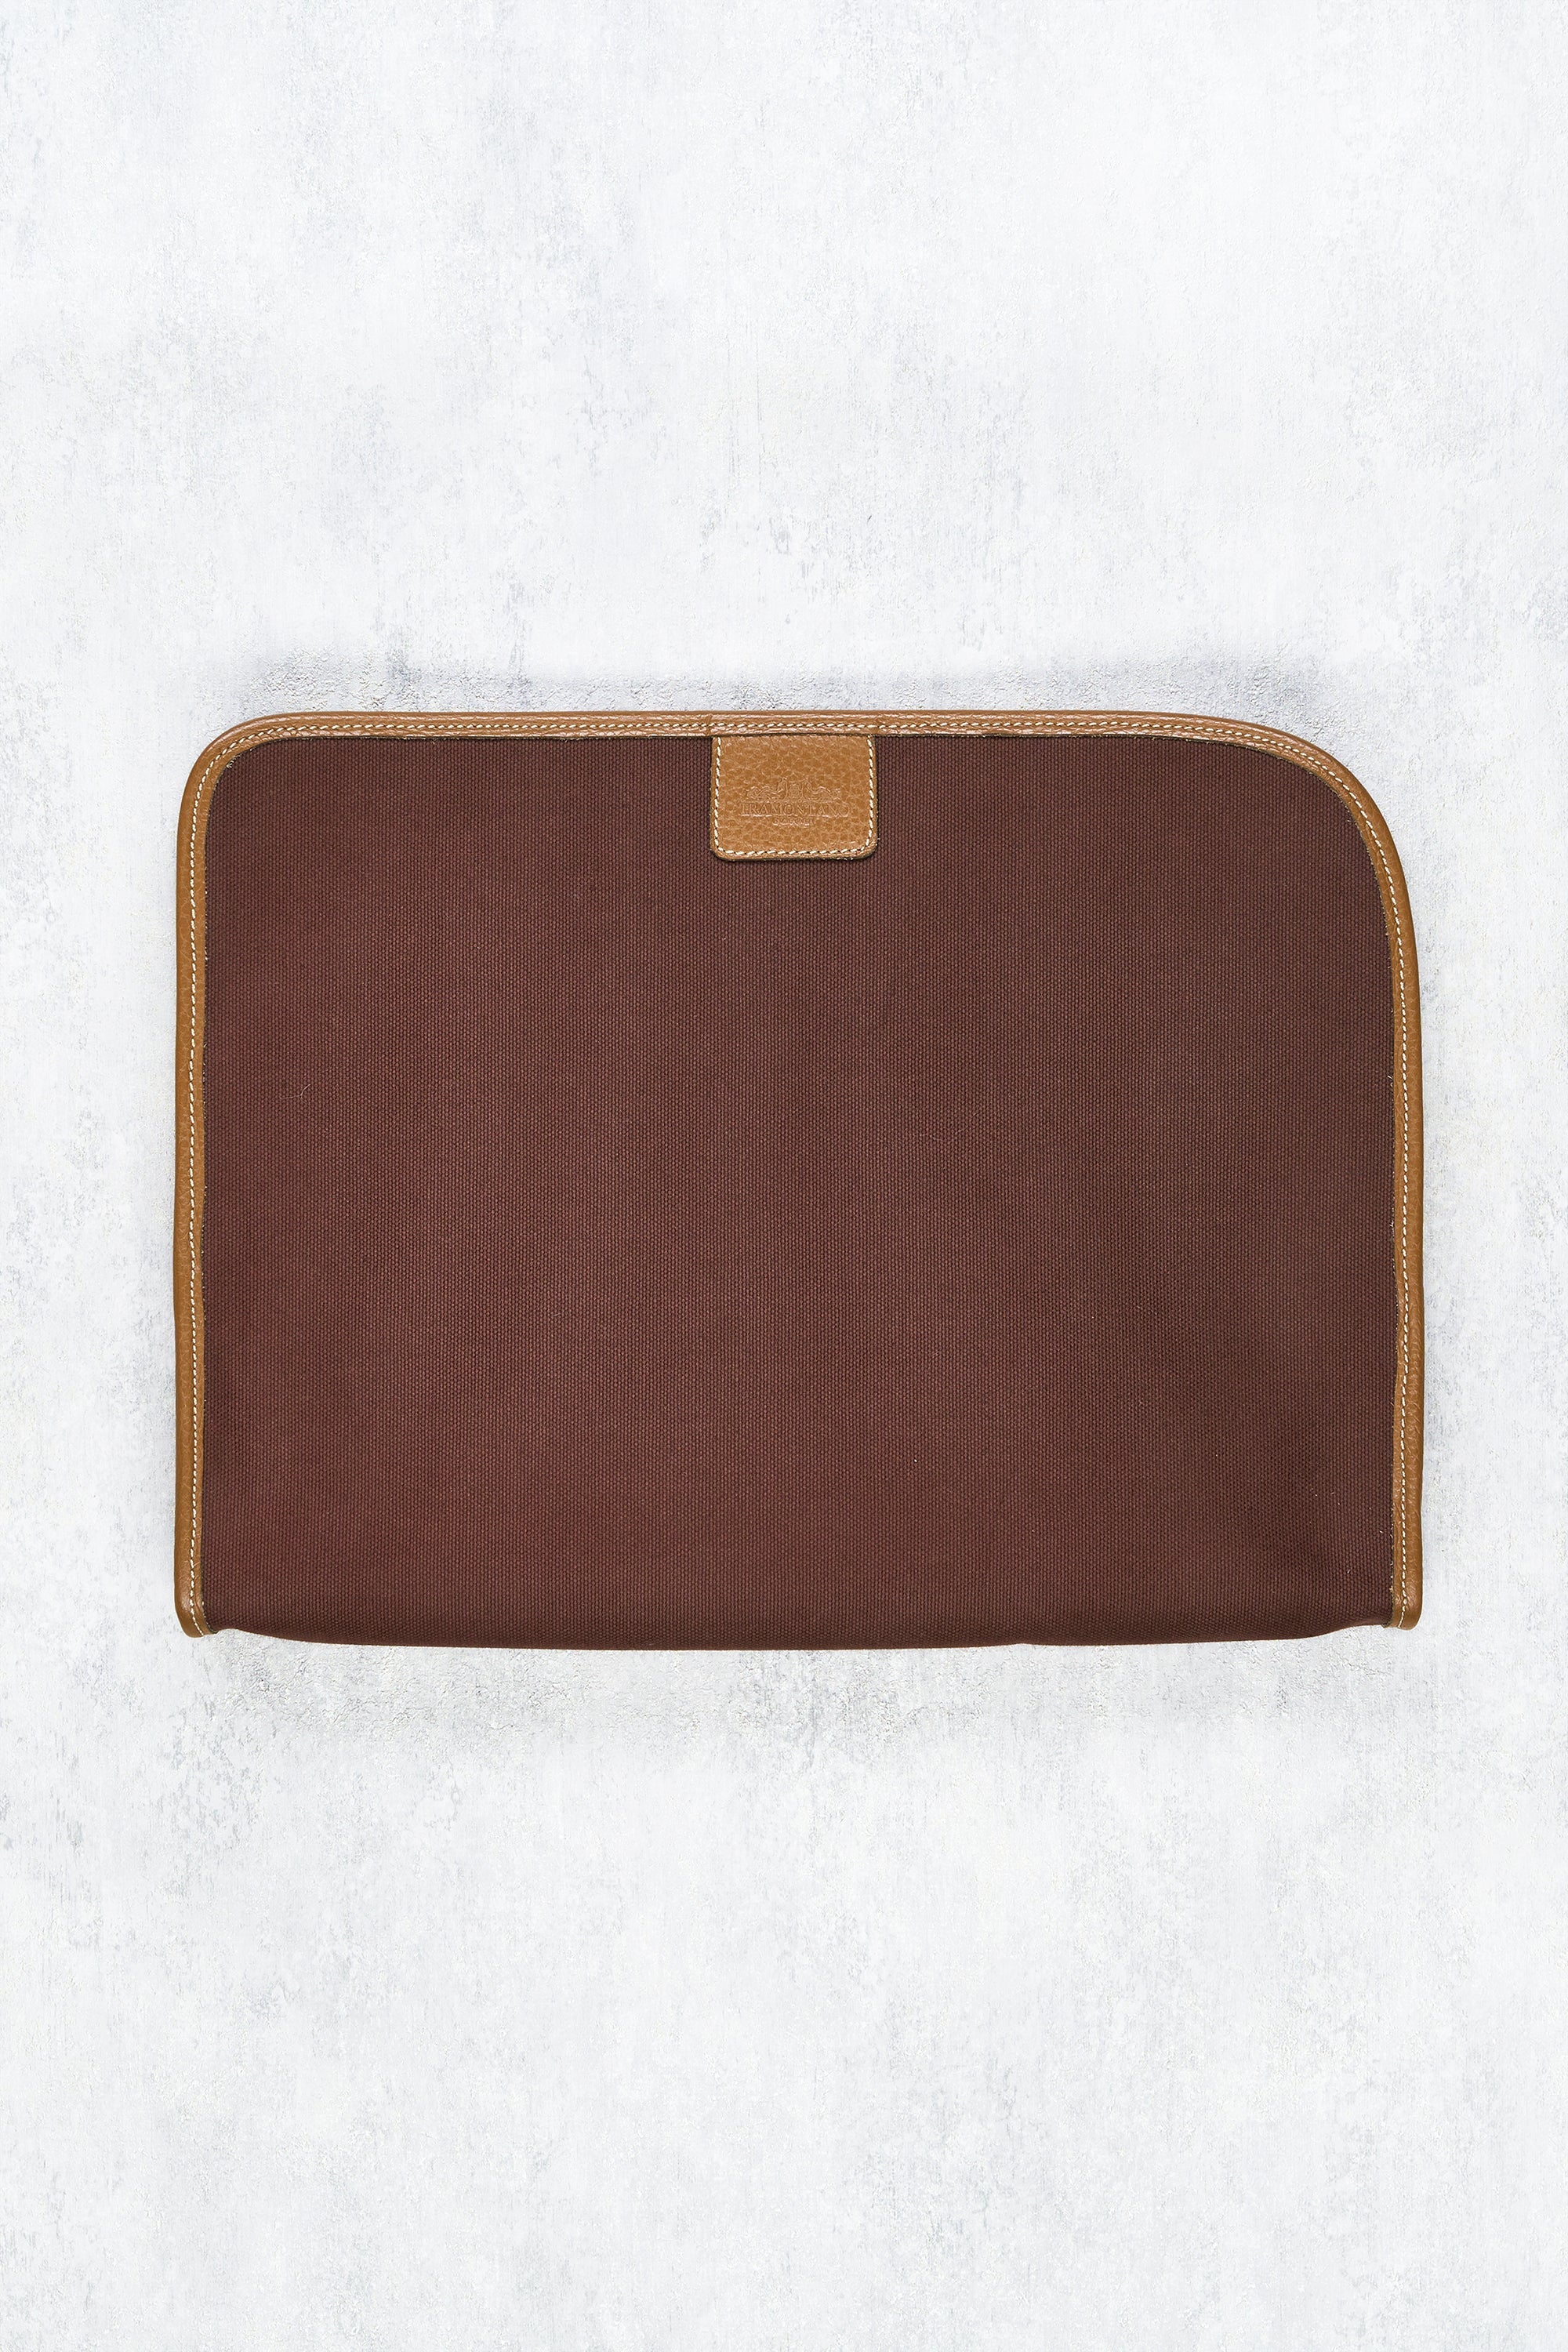 Tramontano Brown Canvas Leather Pouch